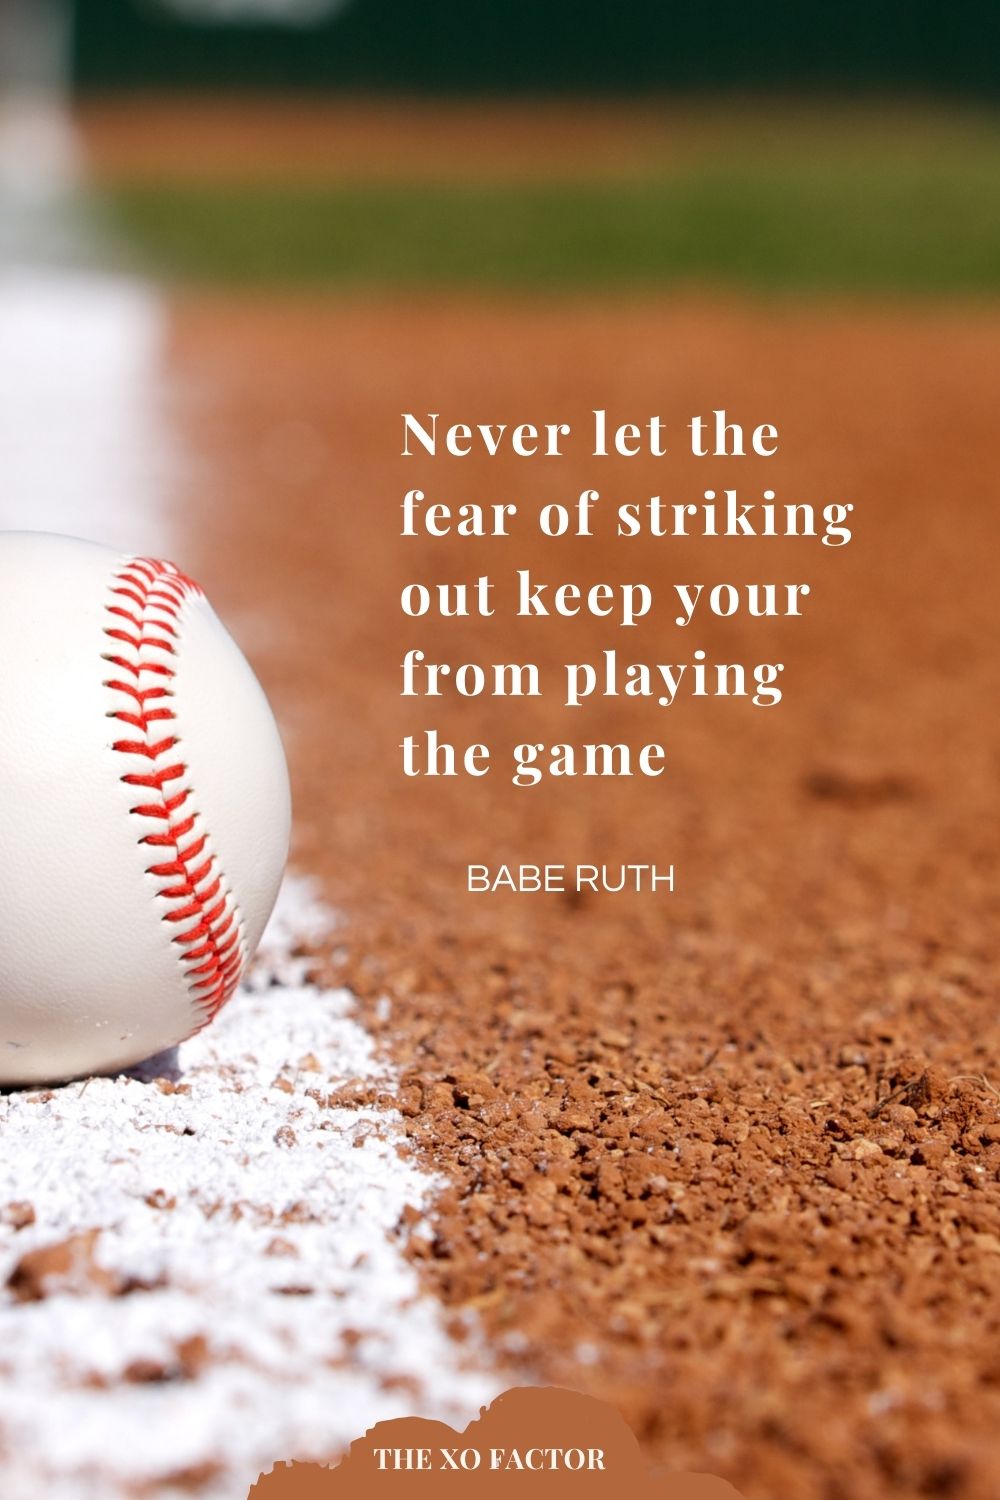 Never let the fear of striking out keep you from playing the game.” Babe Ruth